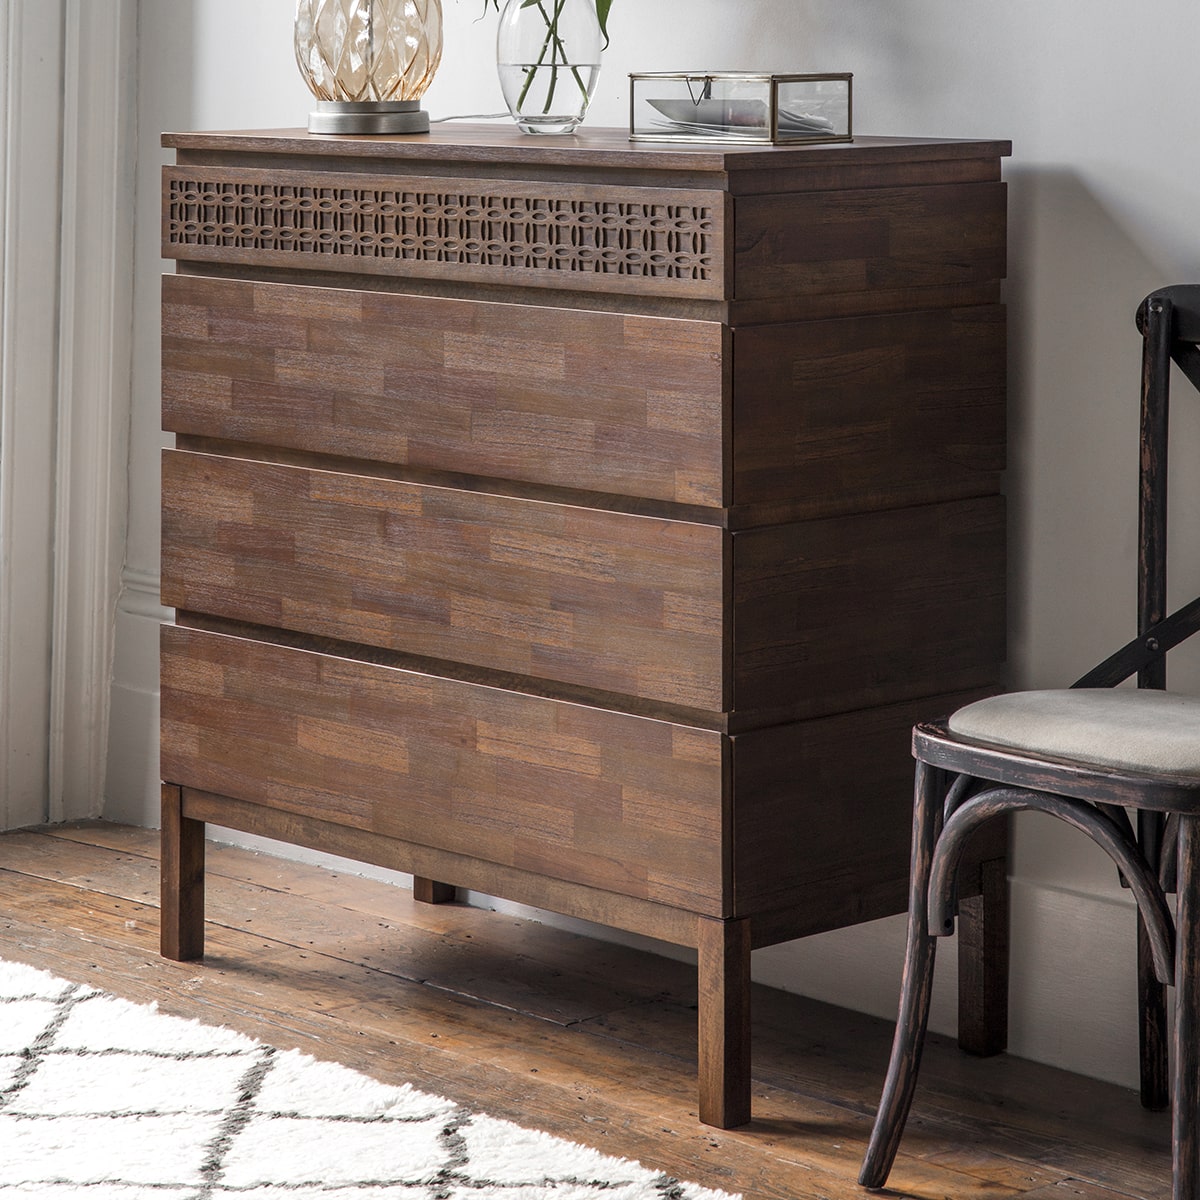 Magnificent brown chest with 4 drawers of storage is shown in the room setting with decor. The front of the top drawer has a stunning frieze of the blind fretwork and the drawers are made with mixed wood veneers put together in a mosaic manner shimmering in the light.